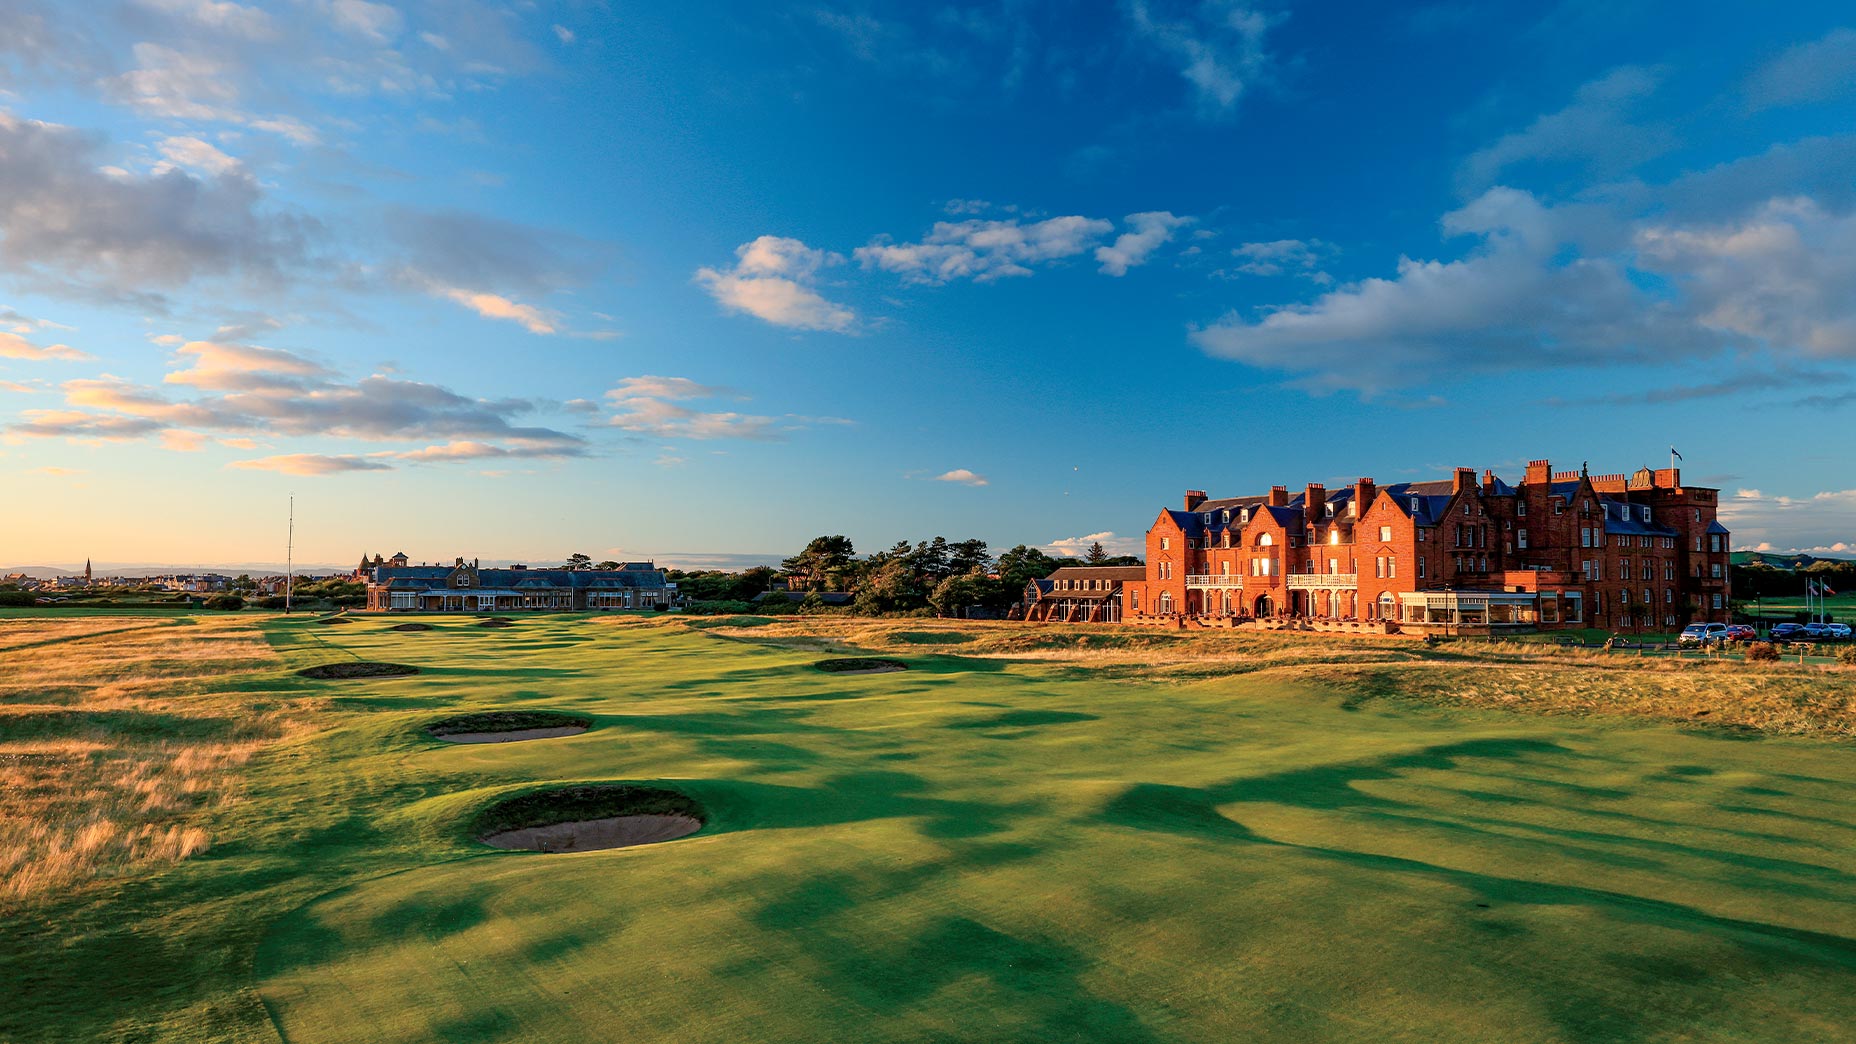 7 holes at Royal Troon that will decide the Open Championship